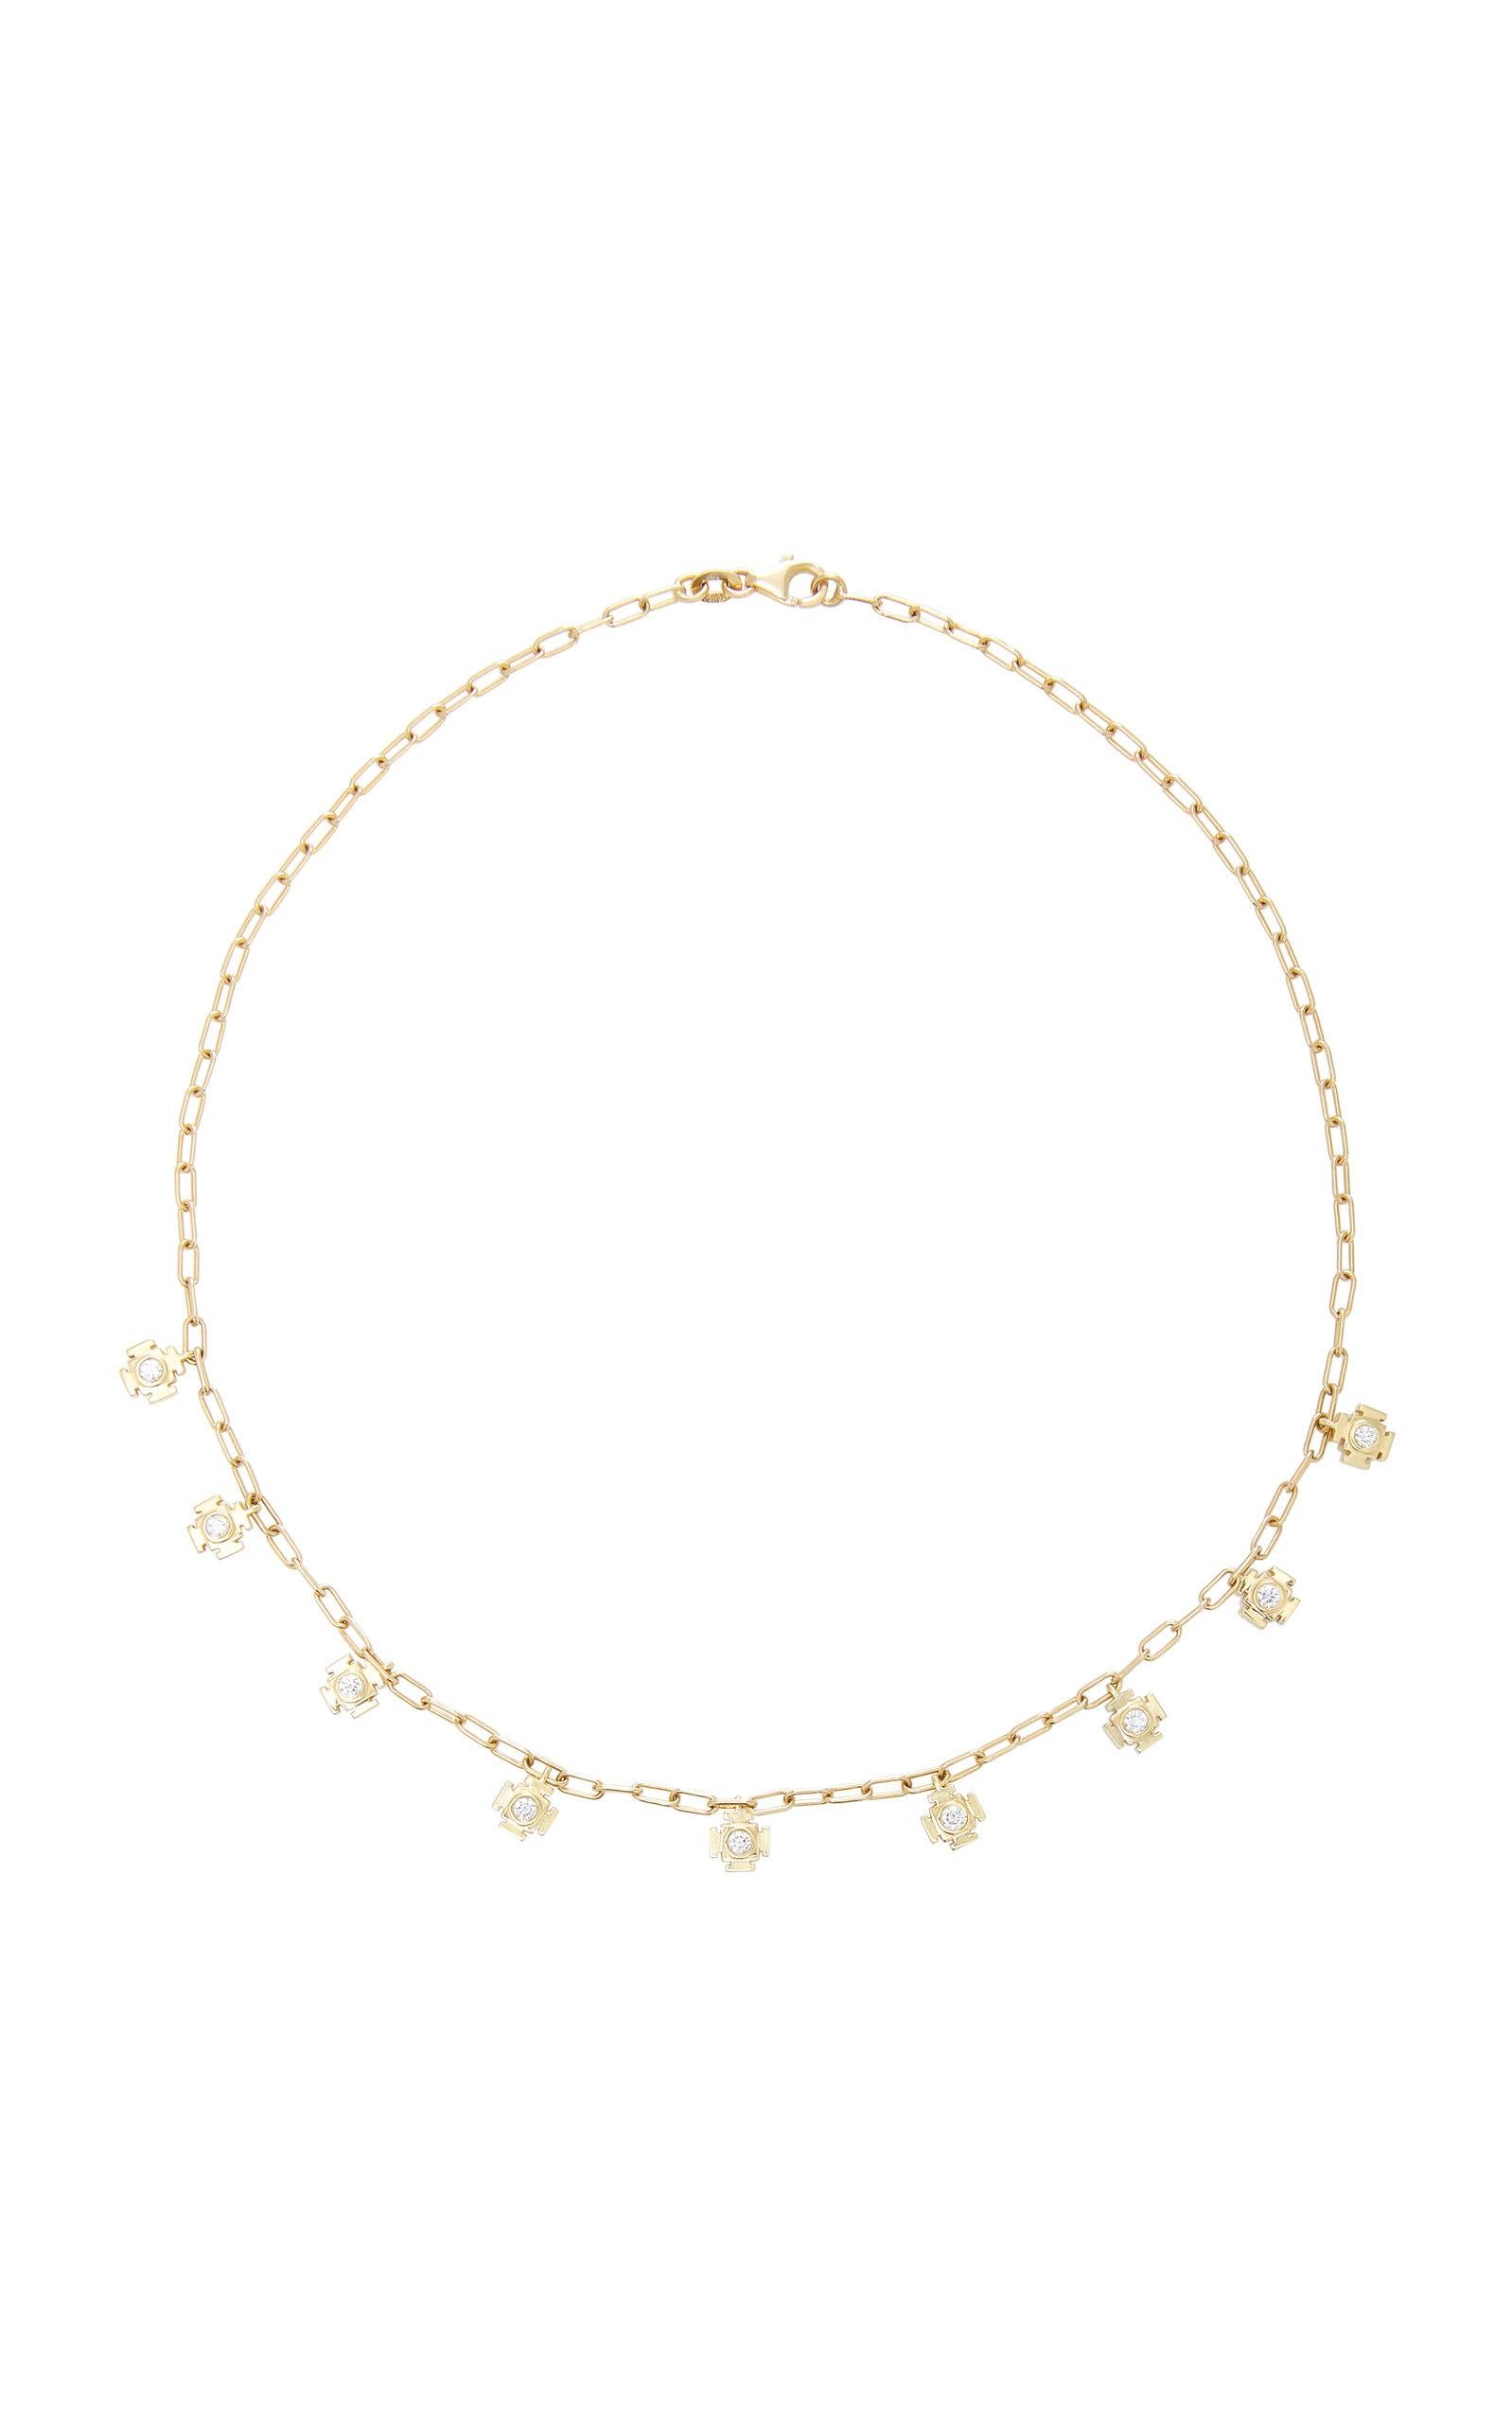 This Mini Gateway Dangling Necklace has 0.50cts White Diamonds. It is handmade in 18 Karat Gold and is made entirely in Los Angeles, CA. The length is 15